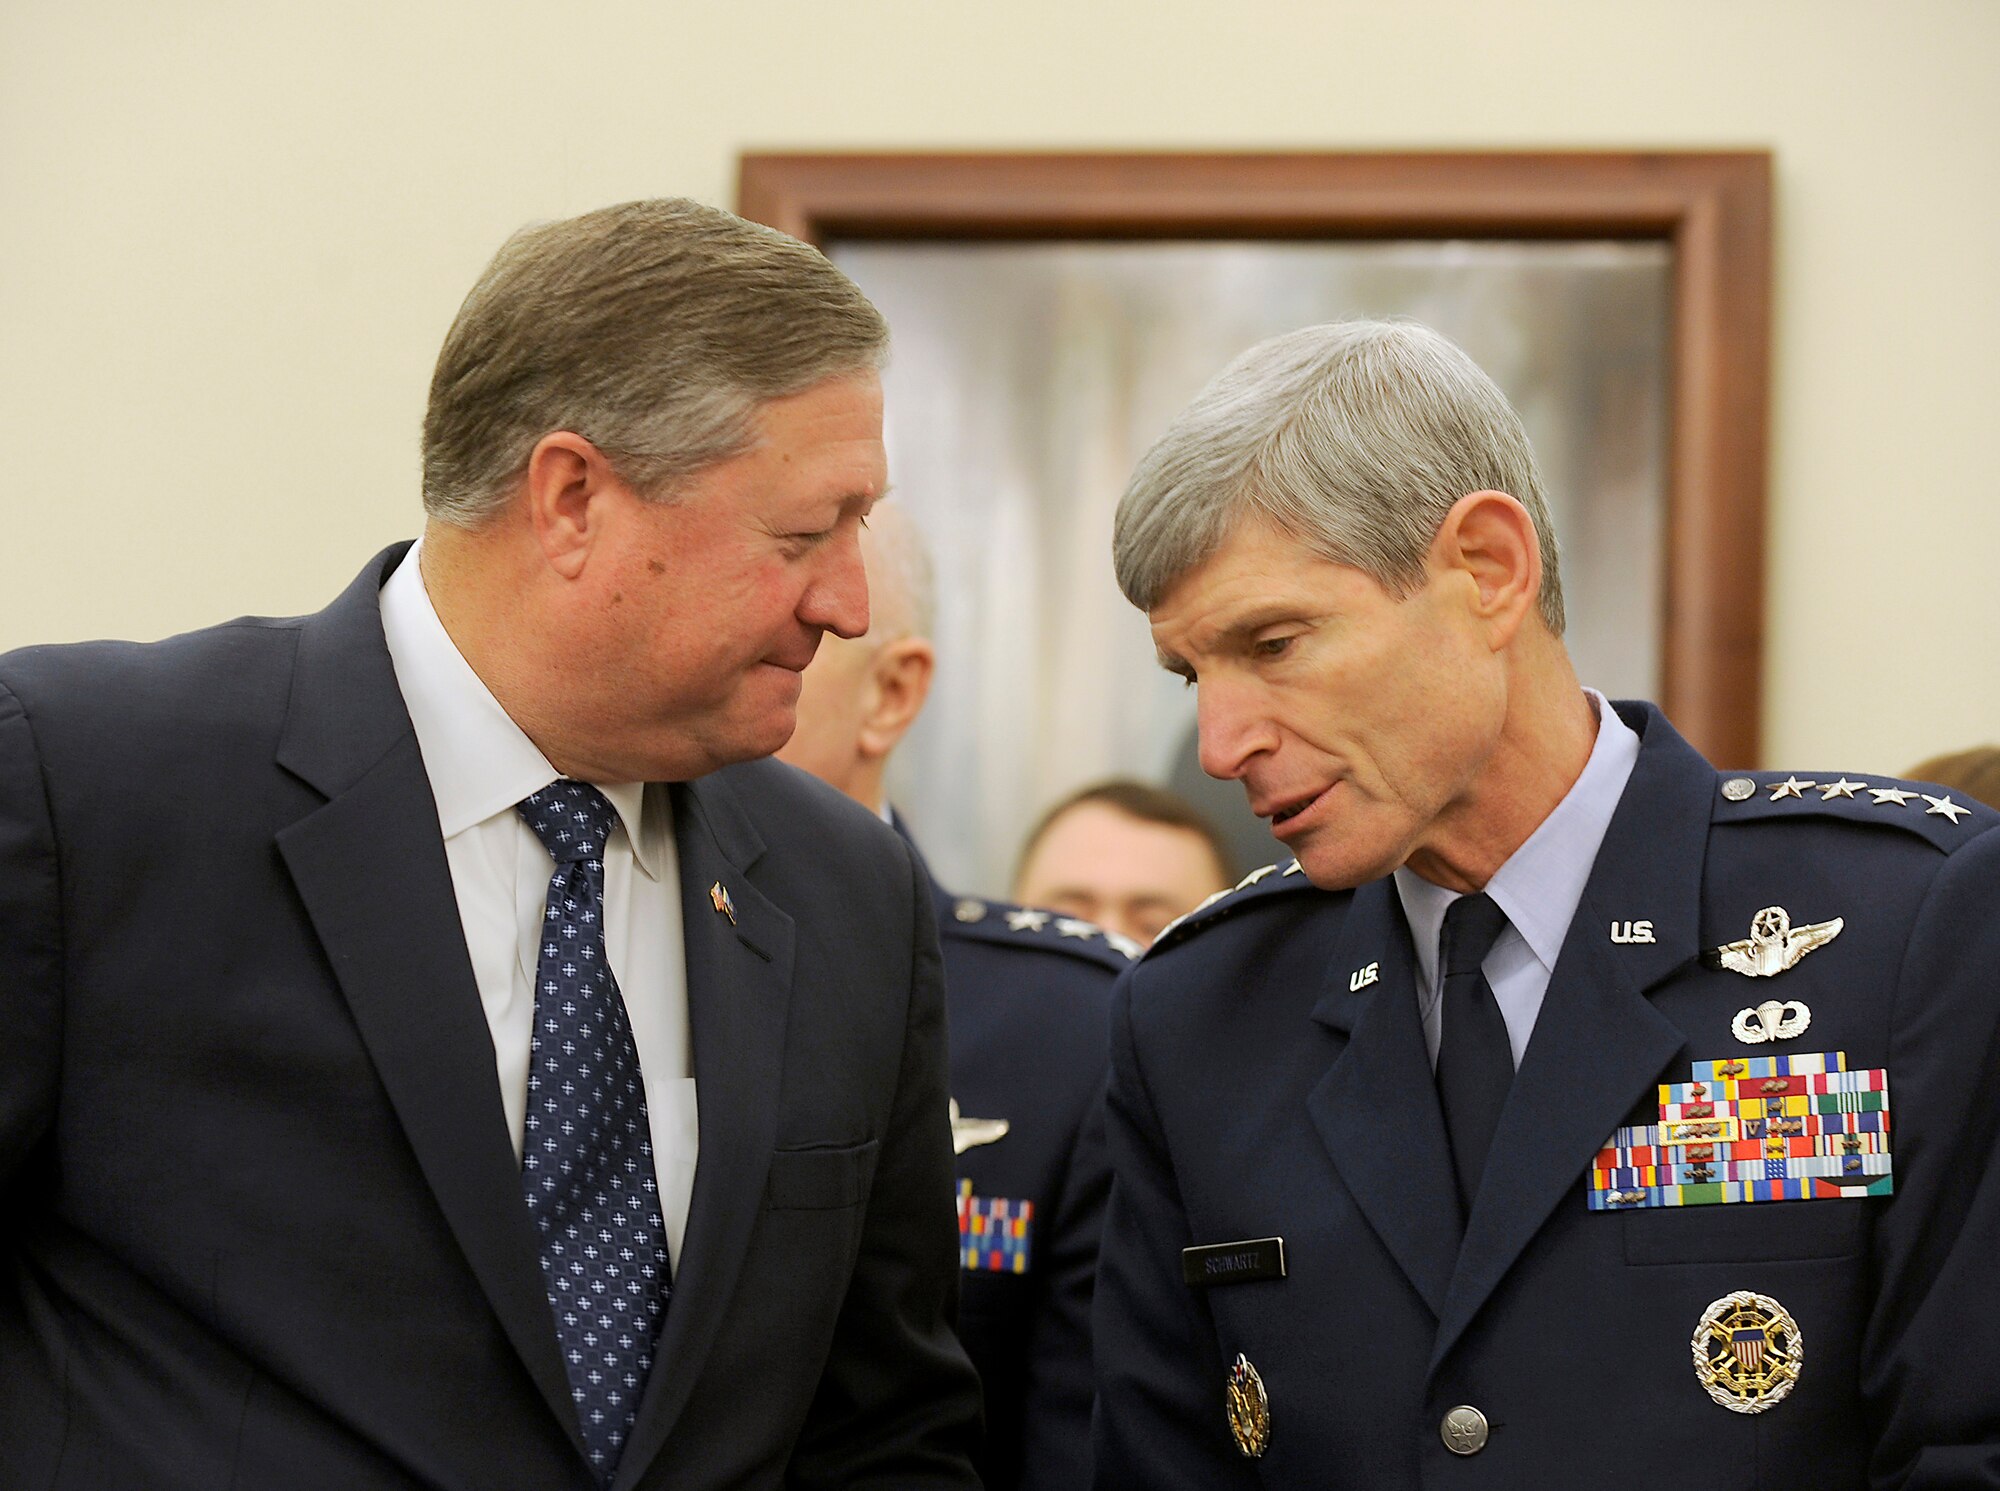 Secretary of the Air Force Michael Donley and Air Force Chief of Staff Gen.
Norton Schwartz talk prior to an Air Force budget hearing before the U.S.
House Appropriations Subcommittee on Defense on March 6, 2012, in Washington, D.C. (U.S. Air Force photo/Scott M. Ash)
